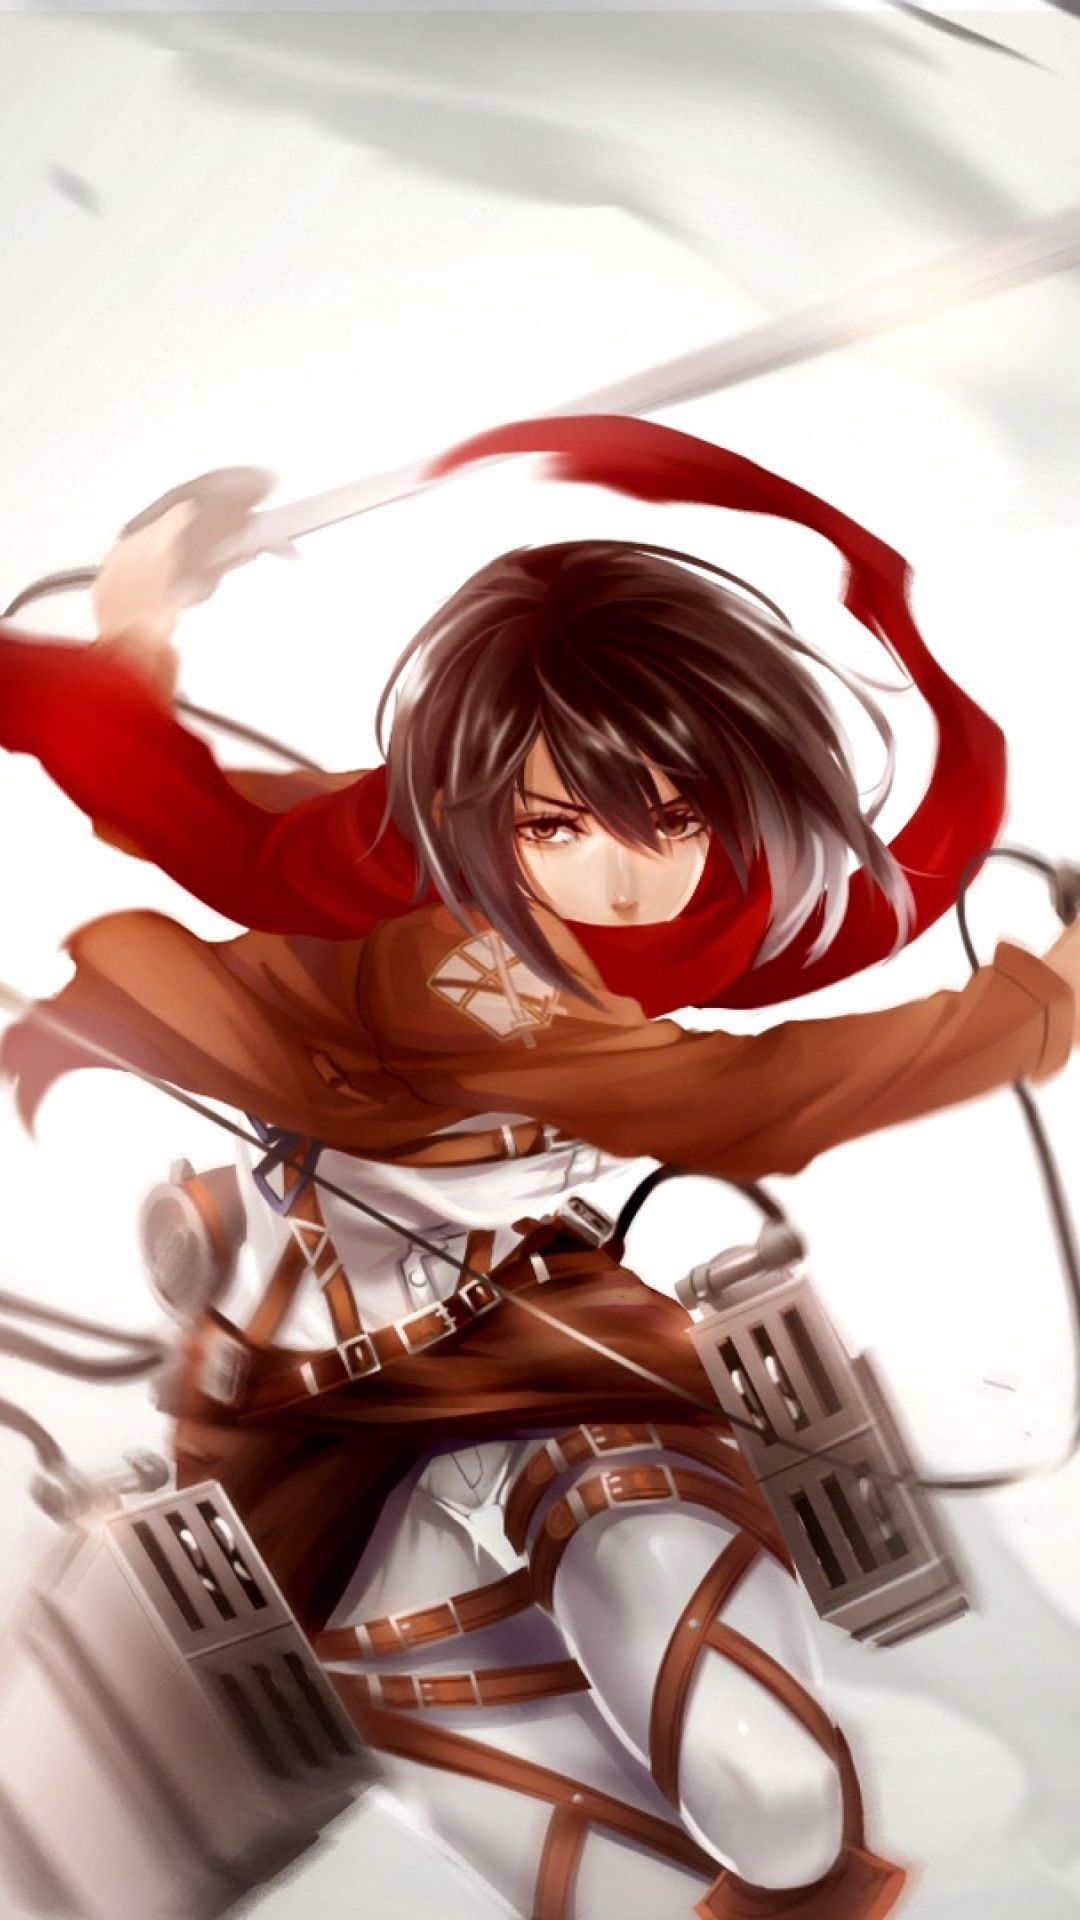 Anime Attack On Titan Mikasa Wallpapers - Wallpaper Cave